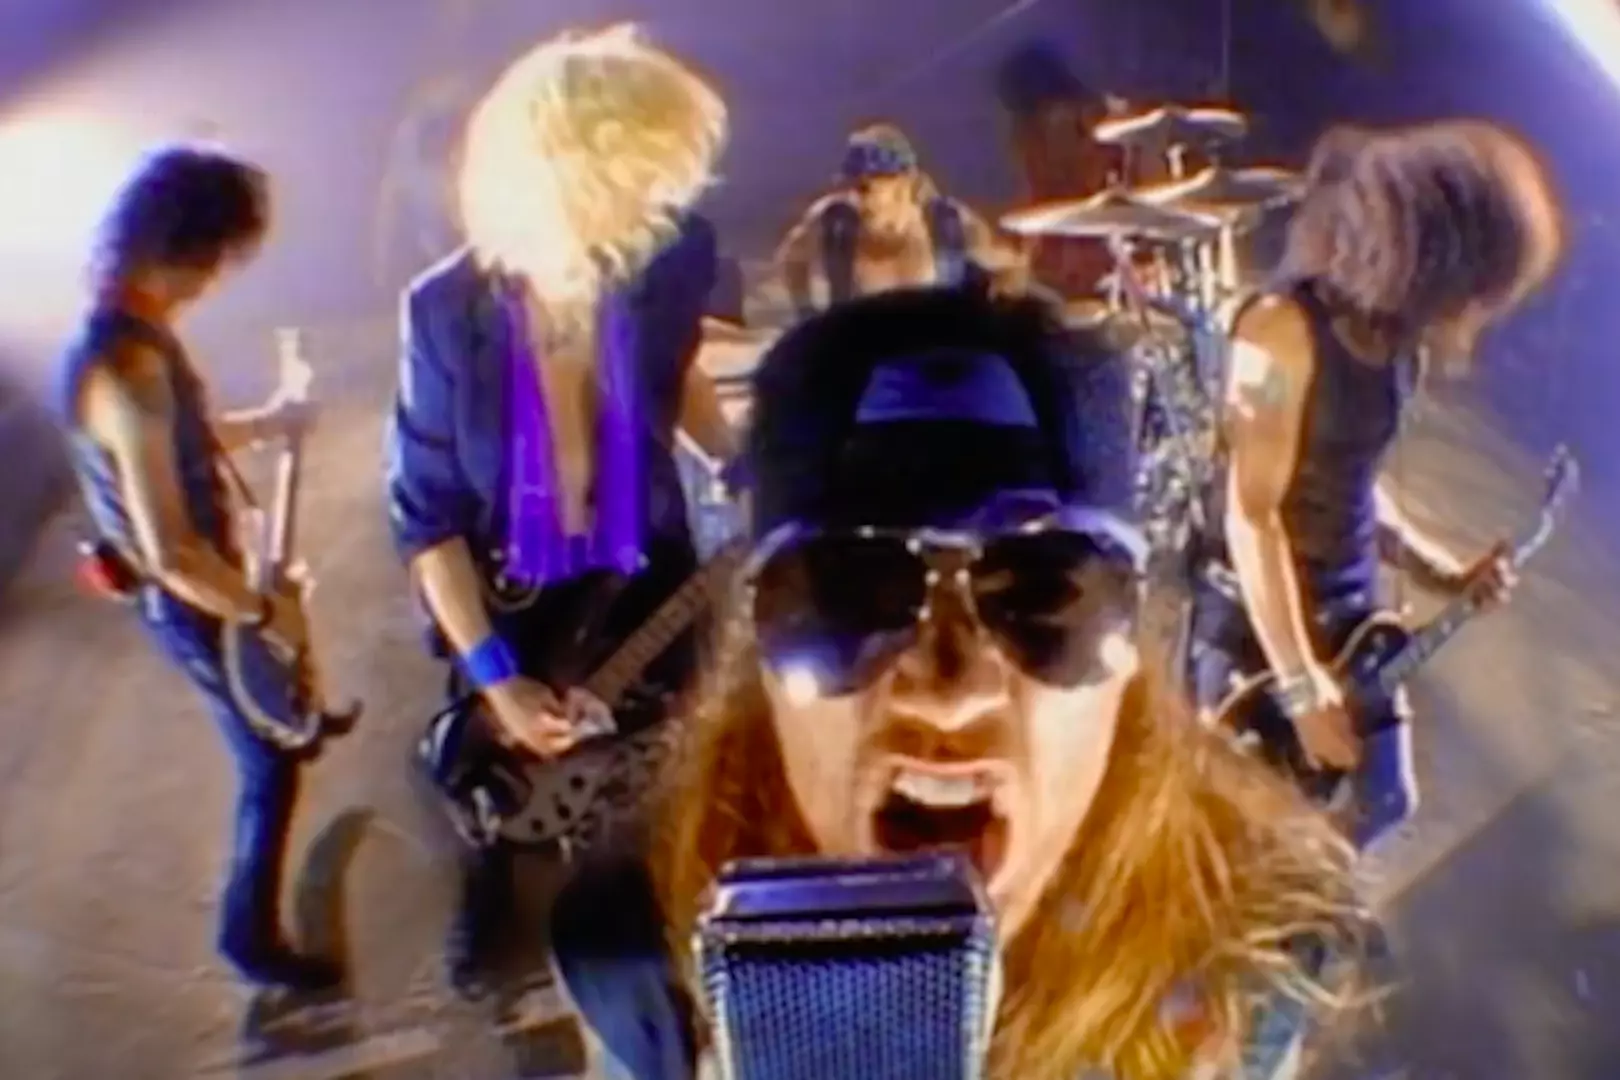 Guns N' Roses 'Use Your Illusions': 20 Facts Only Superfans Know